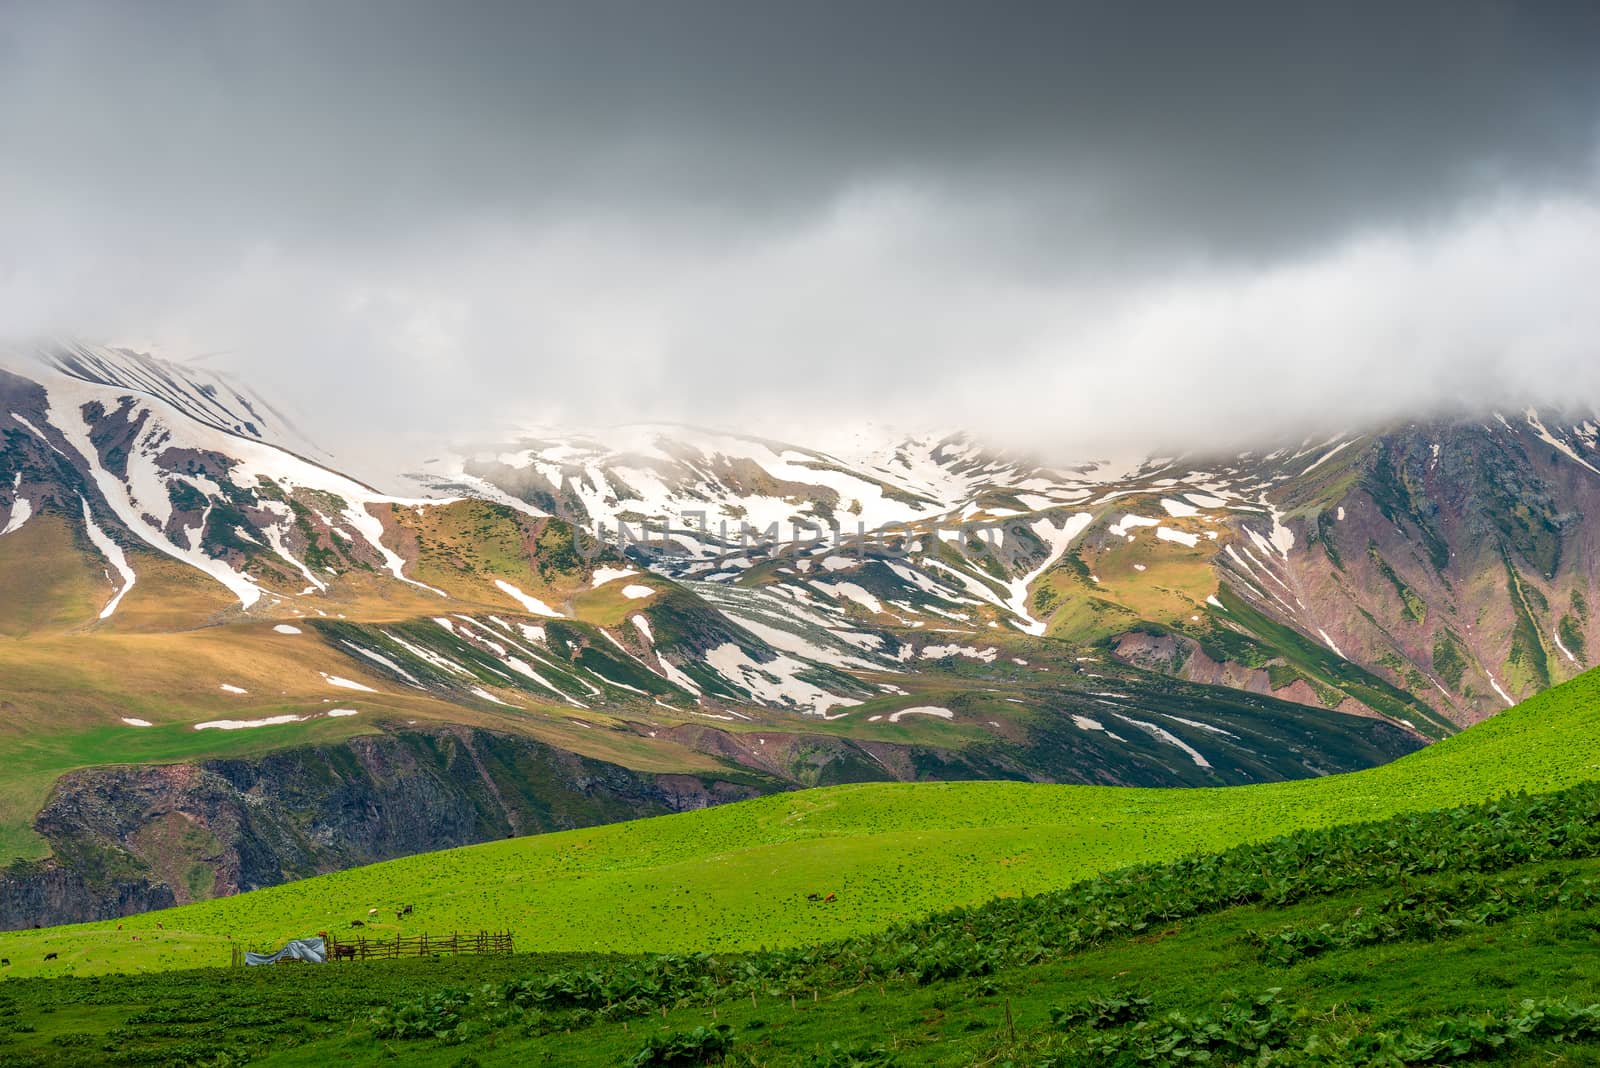 Beautiful relief mountains with snow in June, Caucasus landscape by kosmsos111